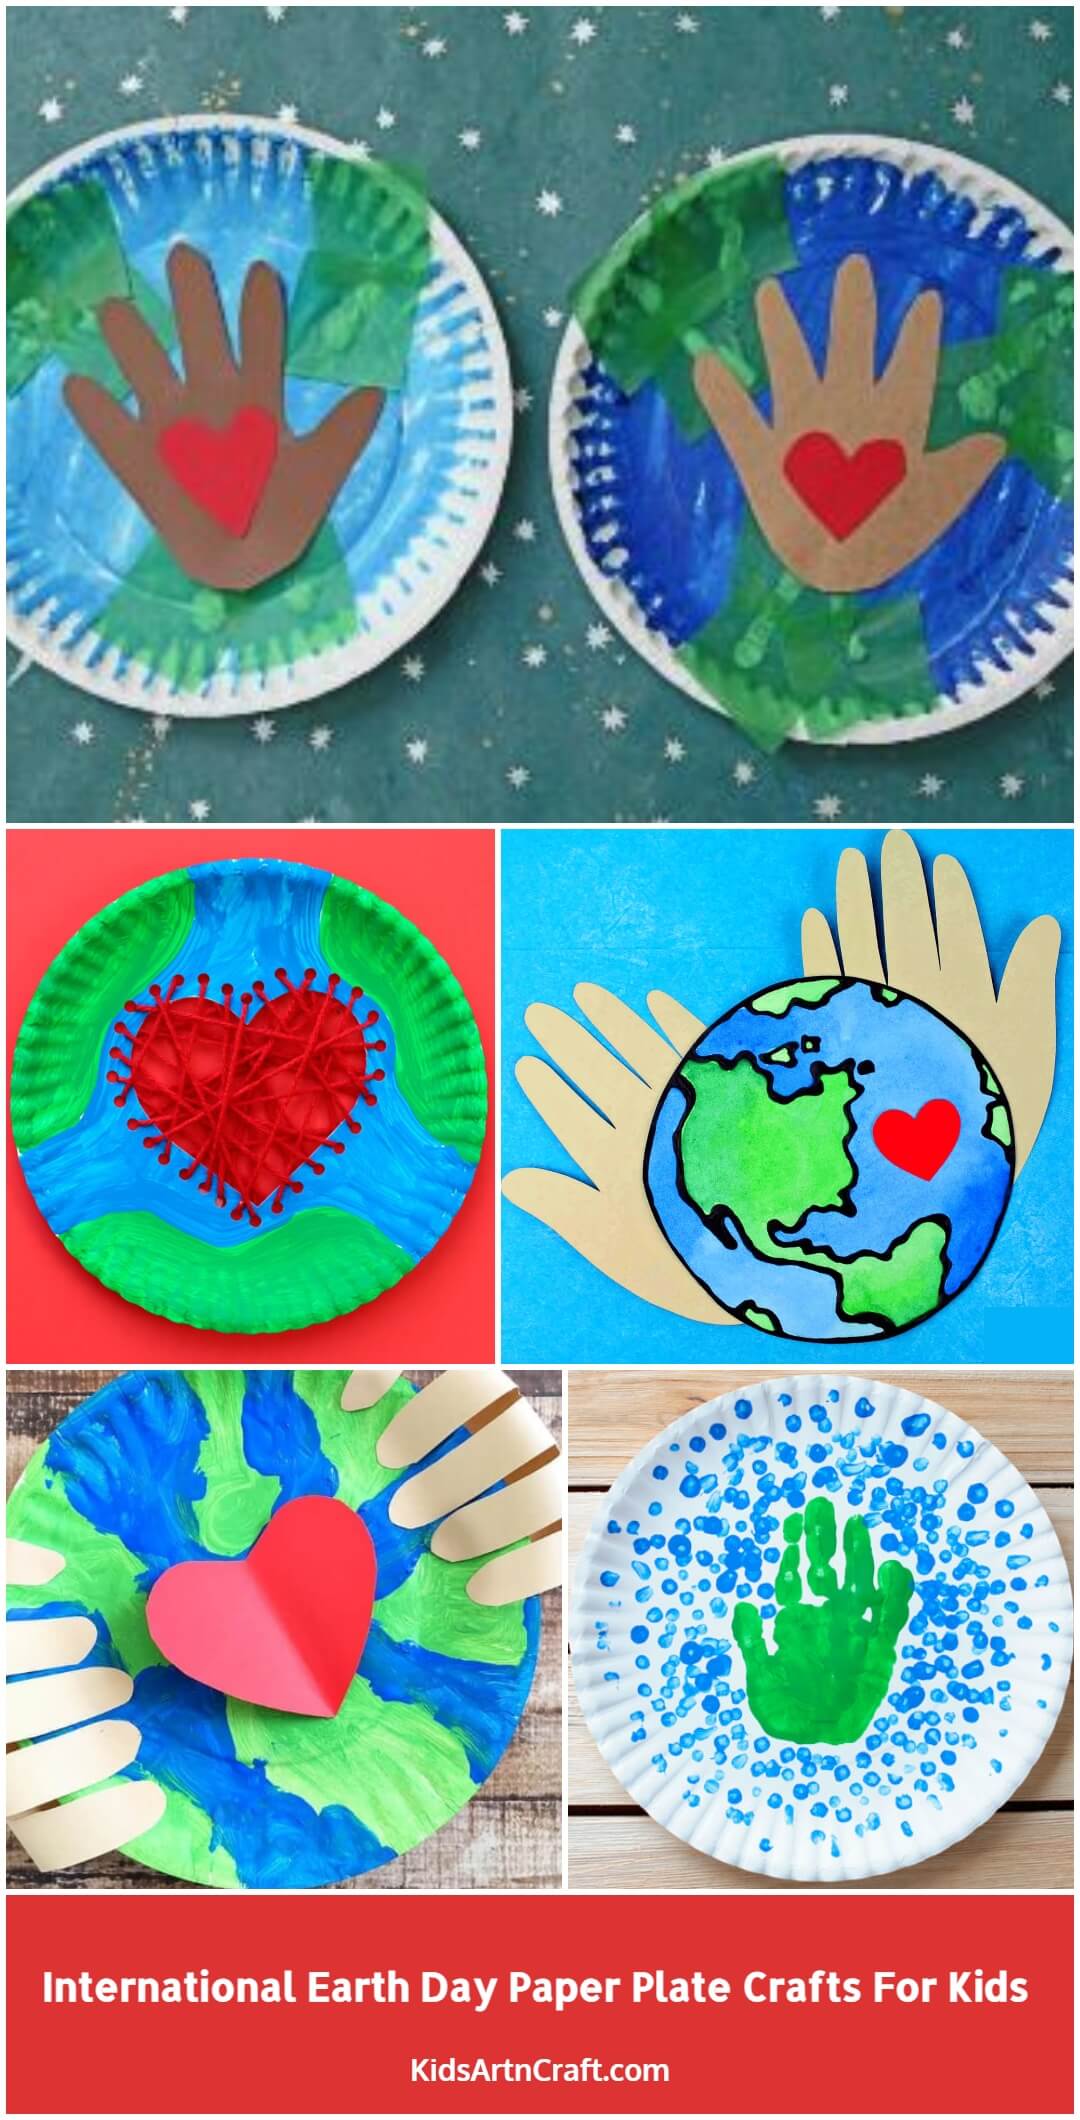 International Earth Day Paper Plate Crafts For Kids